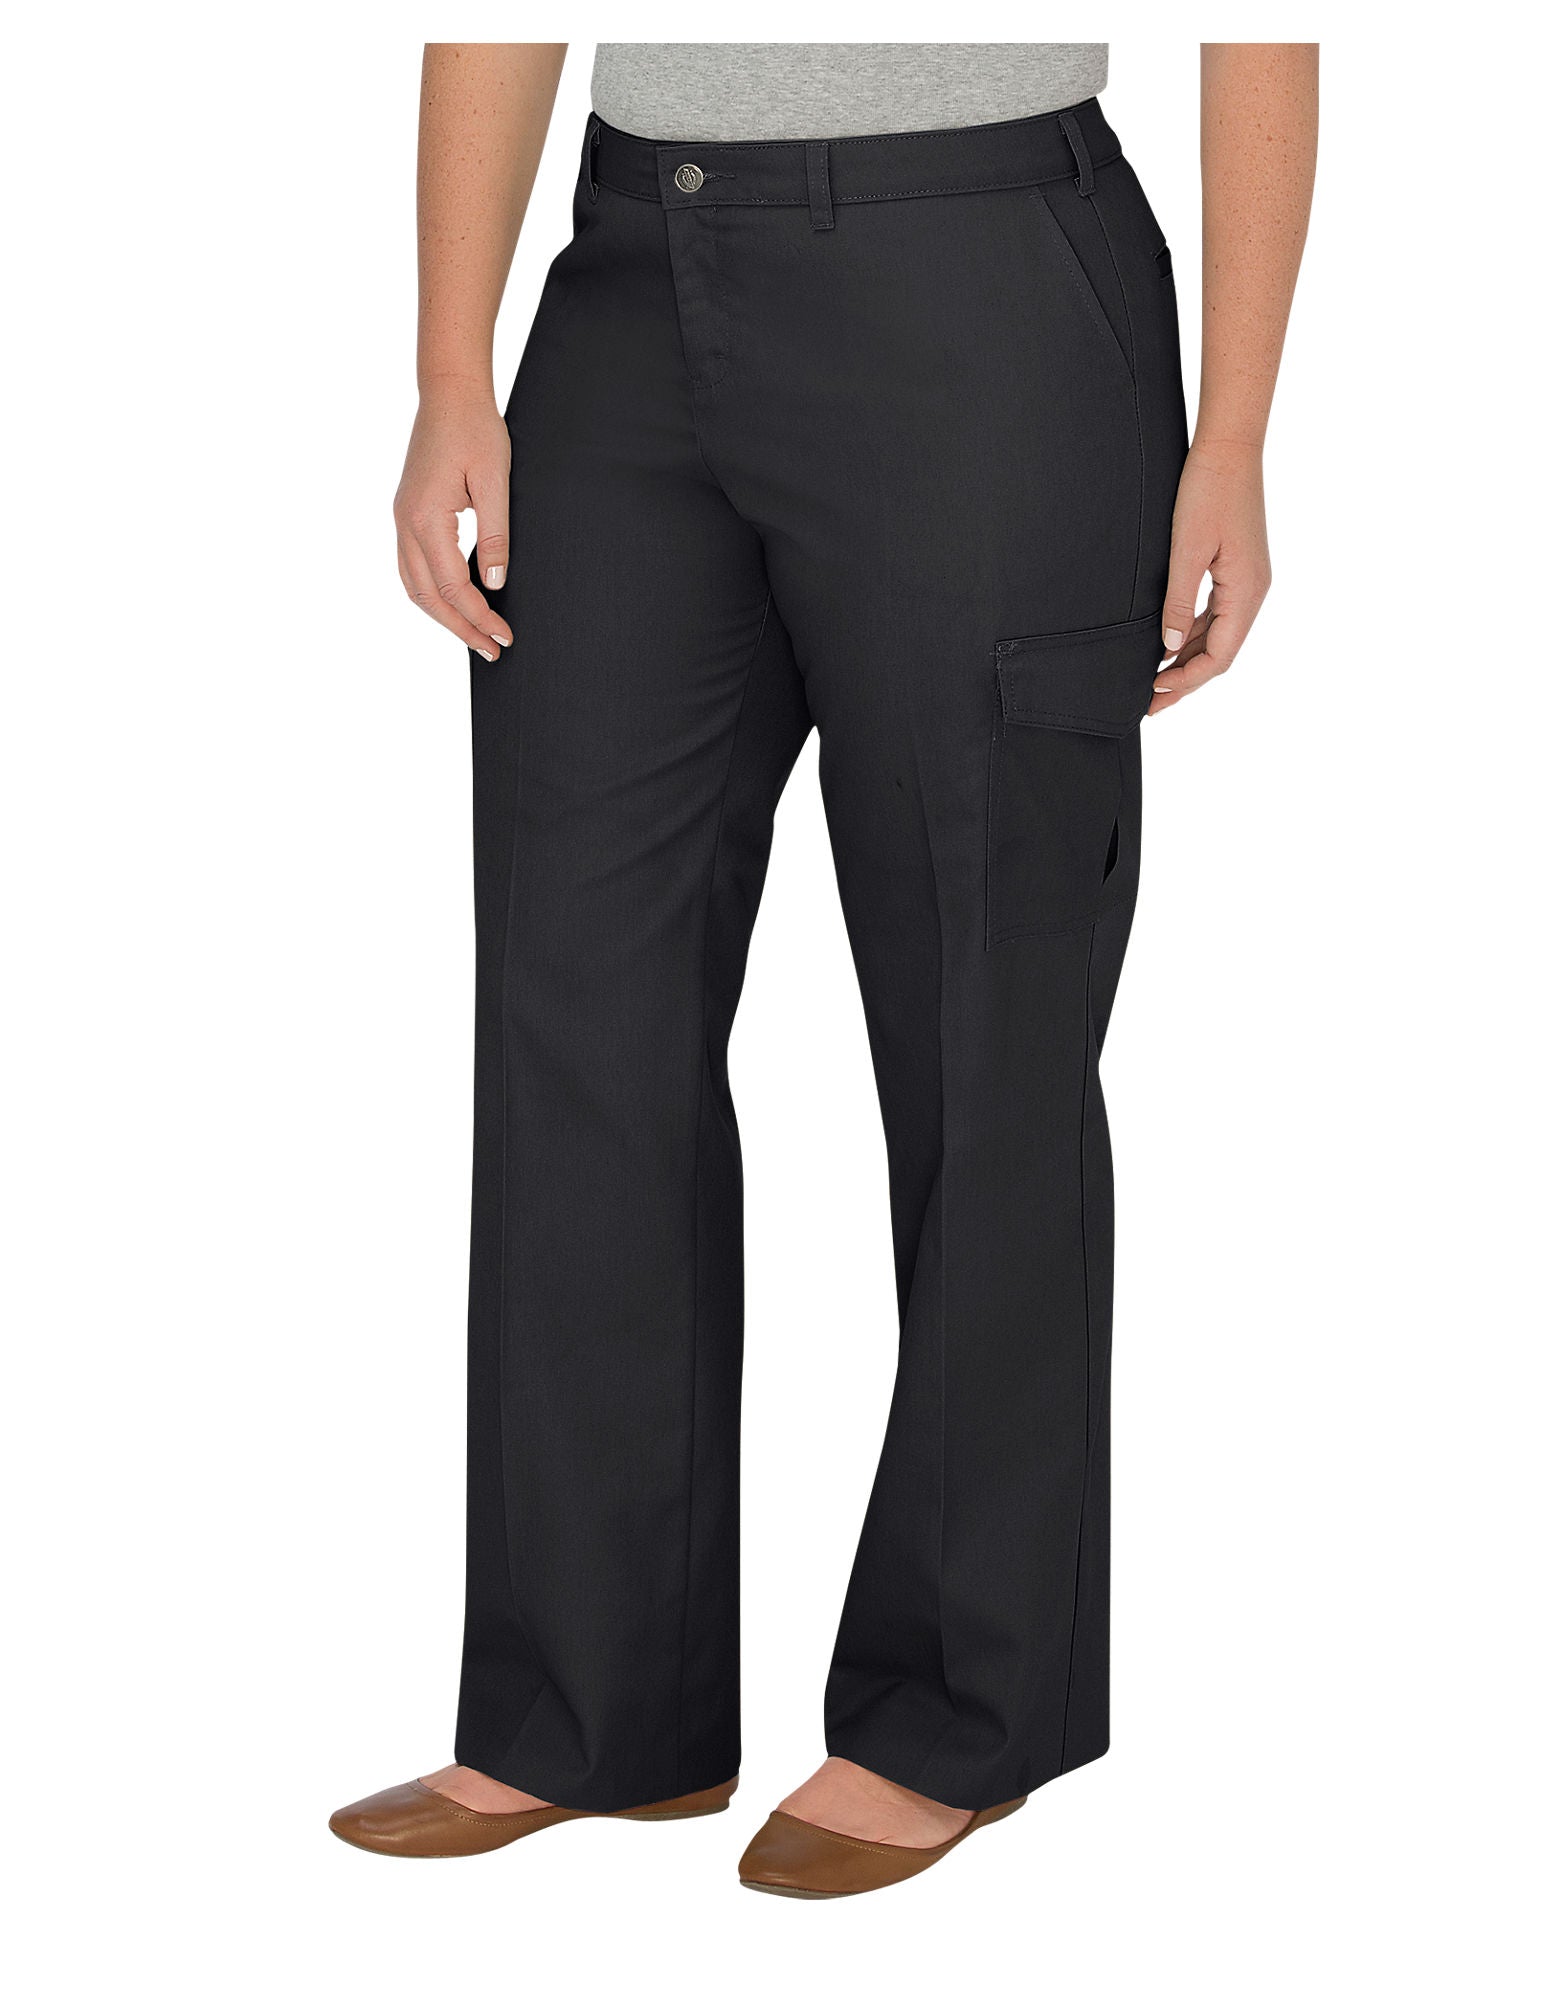 DIC-FPW537 - Dickies Womens Plus Size Relaxed Straight Server Cargo Pants